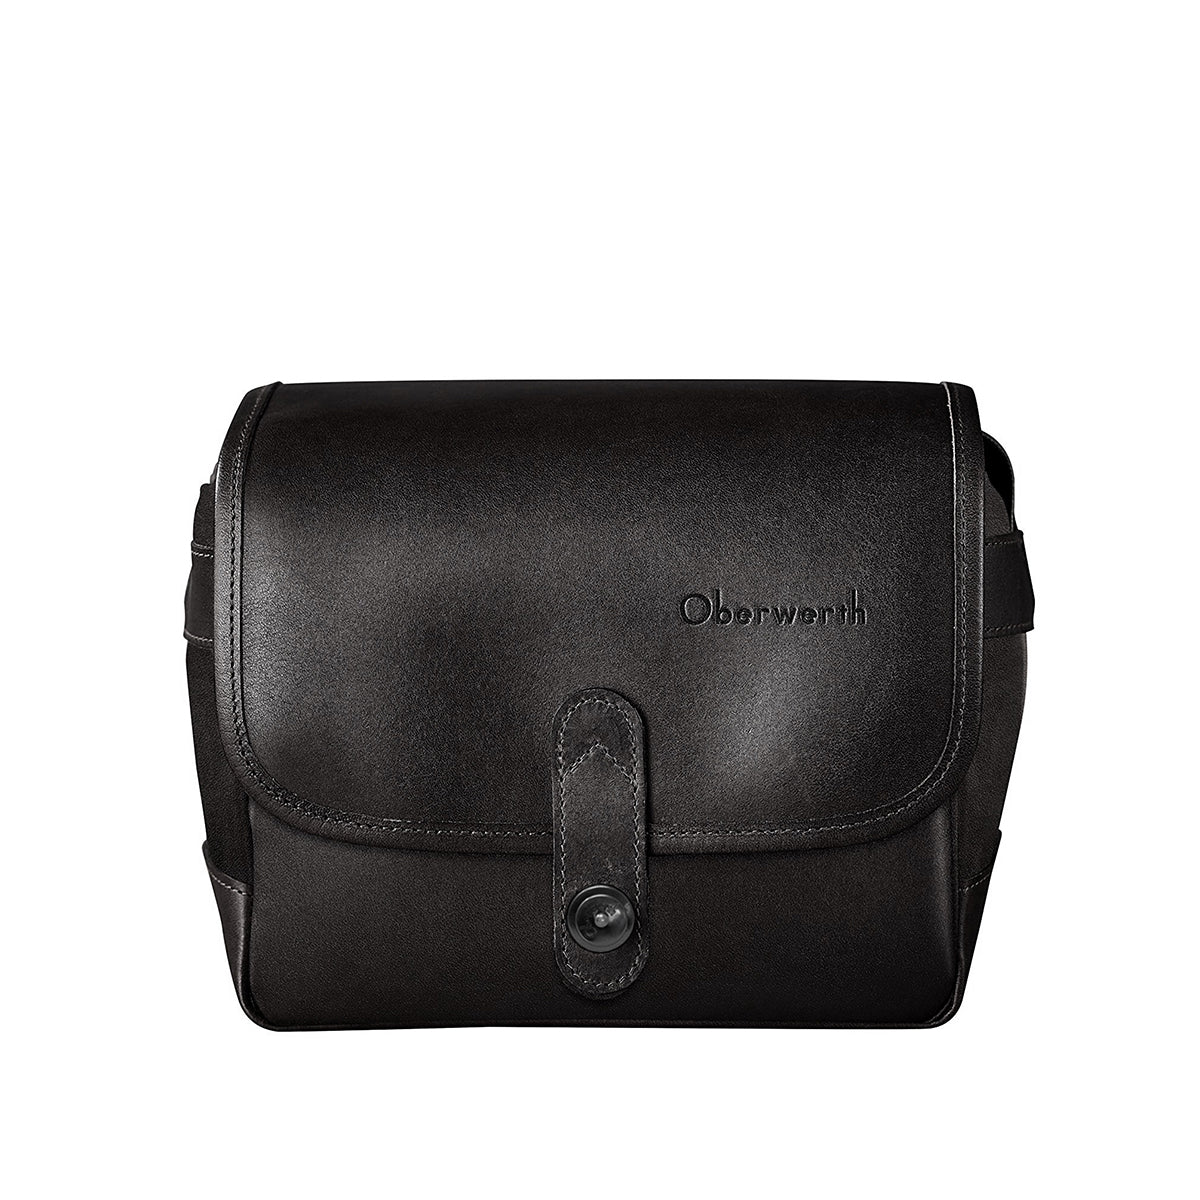 Oberwerth Frankfurt Small Leather Photo Bag - 'Stealth' Edition - Black with Red Lining